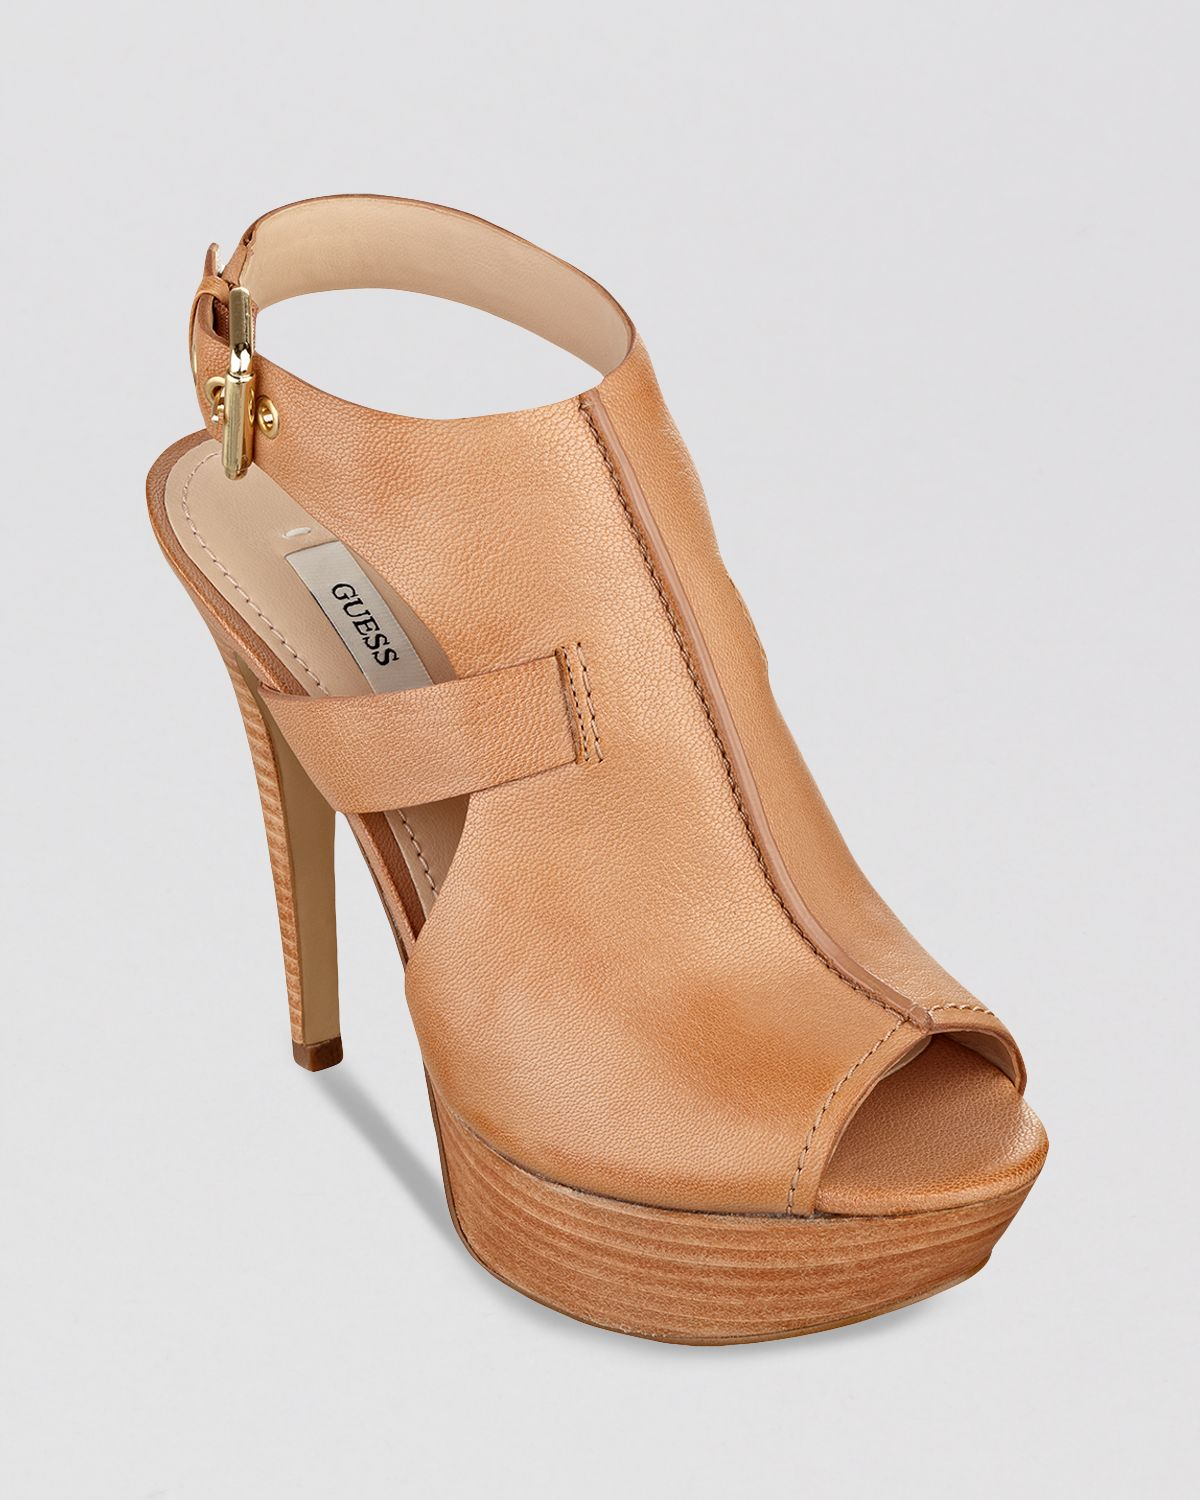 Lyst - Guess Open Toe Sandals - Ofria High Heel in Brown